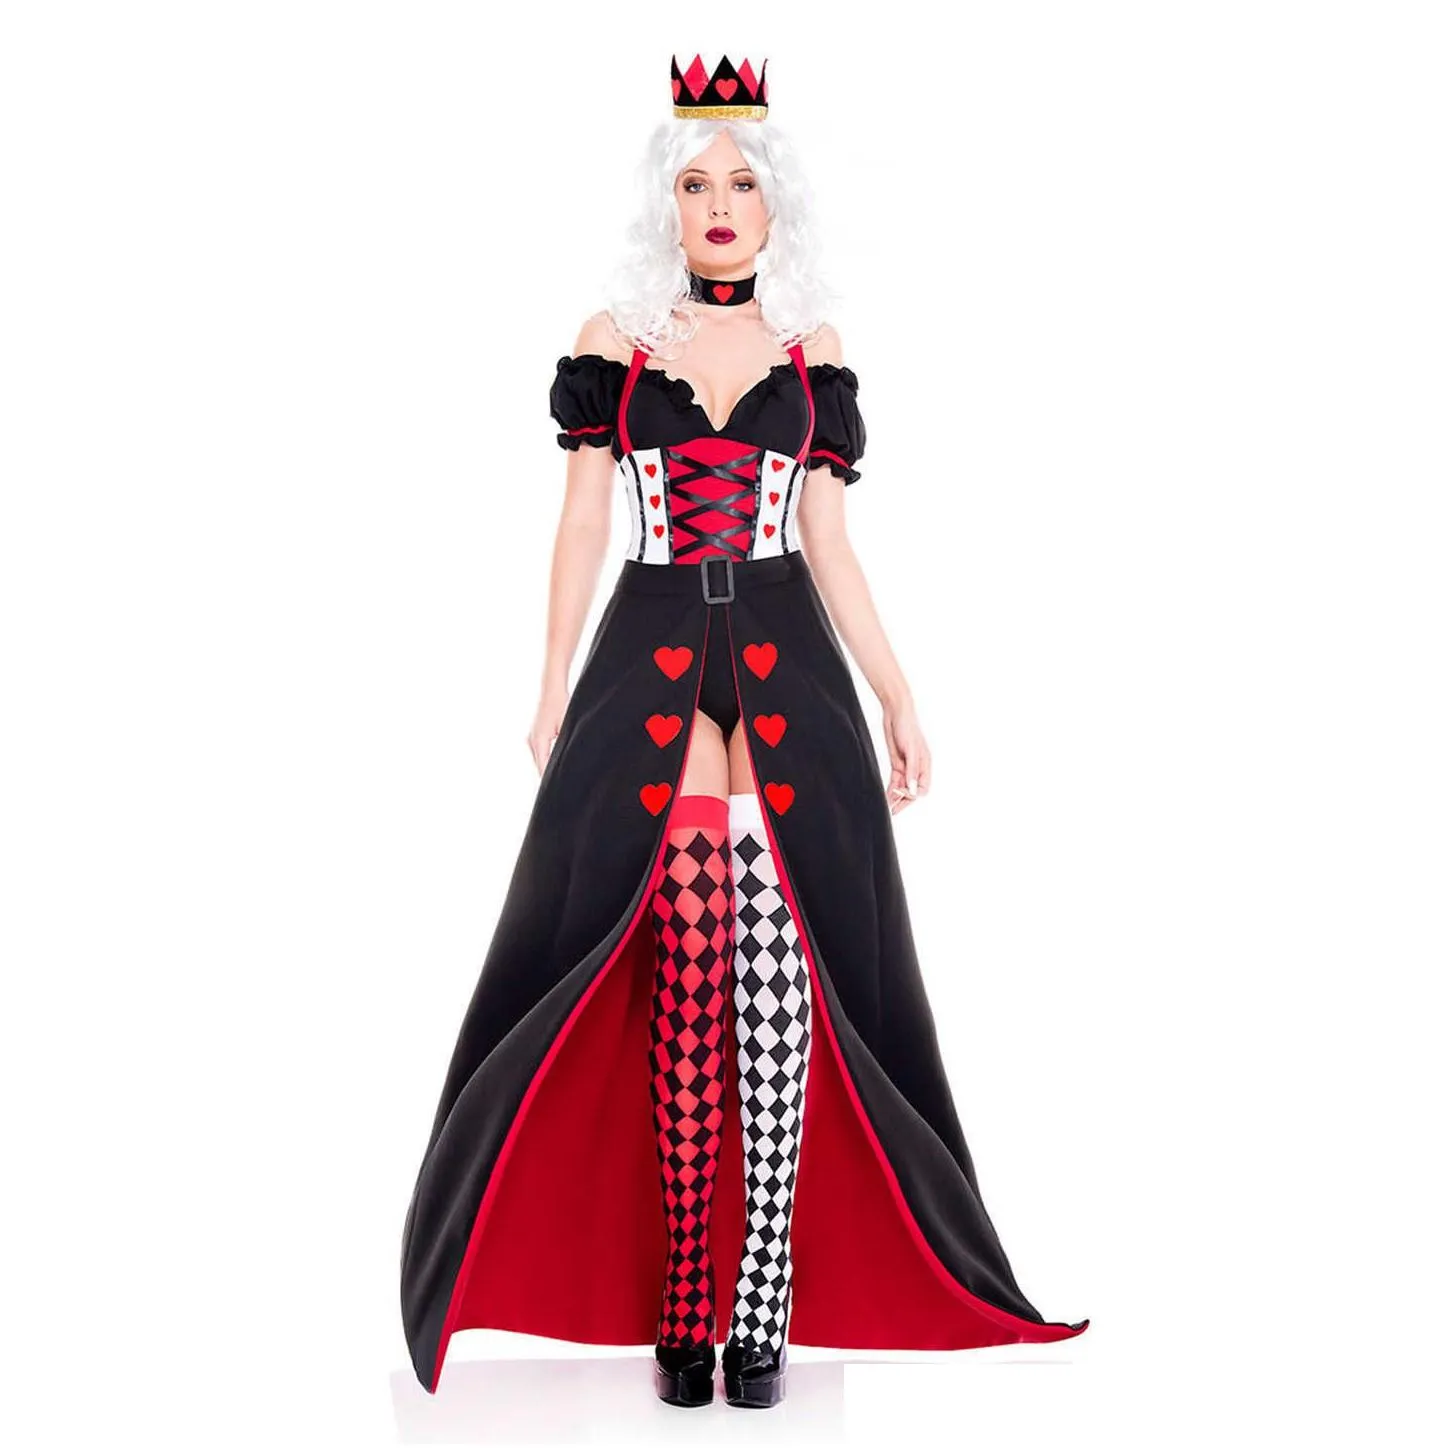 Other Festive Party Supplies Queen Of Hearts Alice In Wonderland Costume Poker Cosplay Halloween Masquerade Costumes Sexy Dress G09 Dhpvo